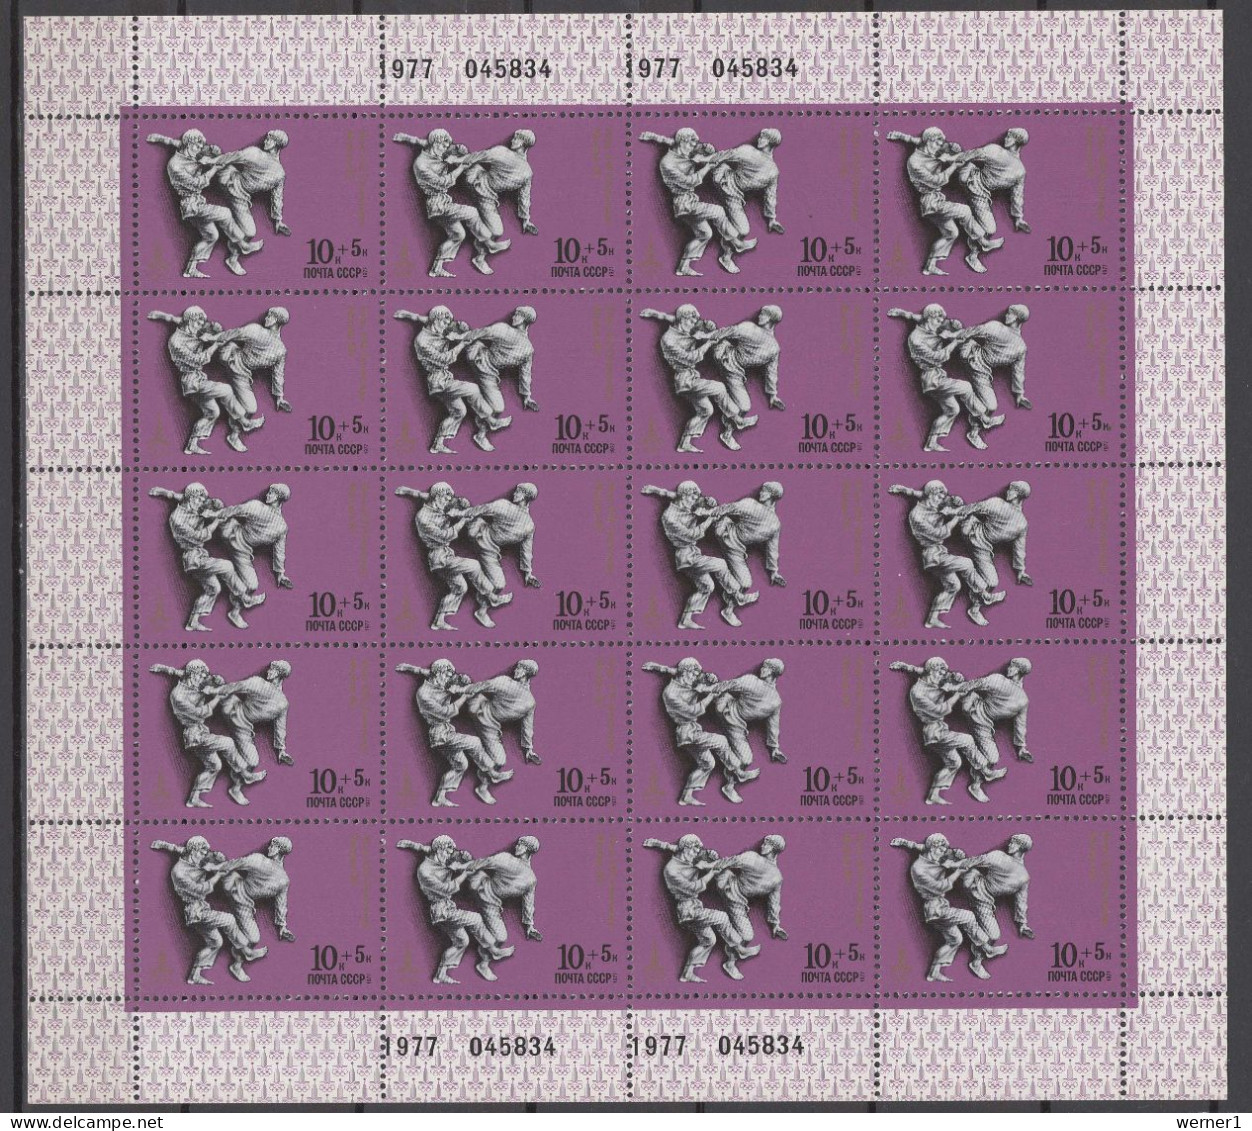 USSR Russia 1977 Olympic Games Moscow, Wrestling, Judo, Boxing, Weightlifting Set Of 5 Sheetlets MNH - Estate 1980: Mosca